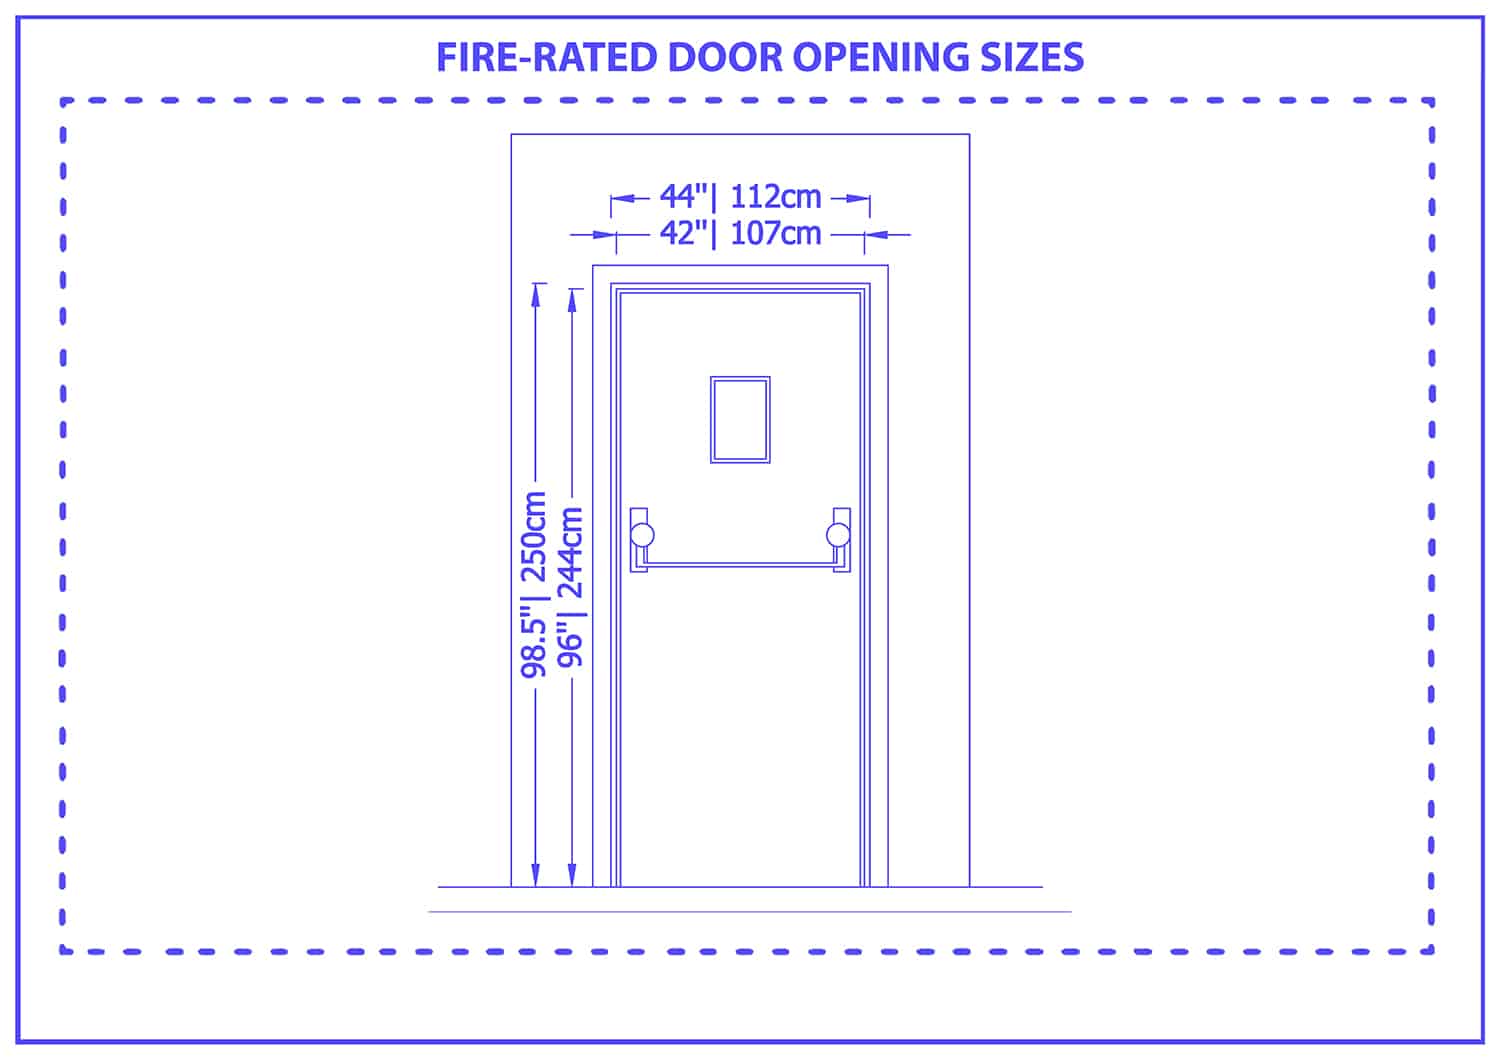 Fire rated door opening sizes